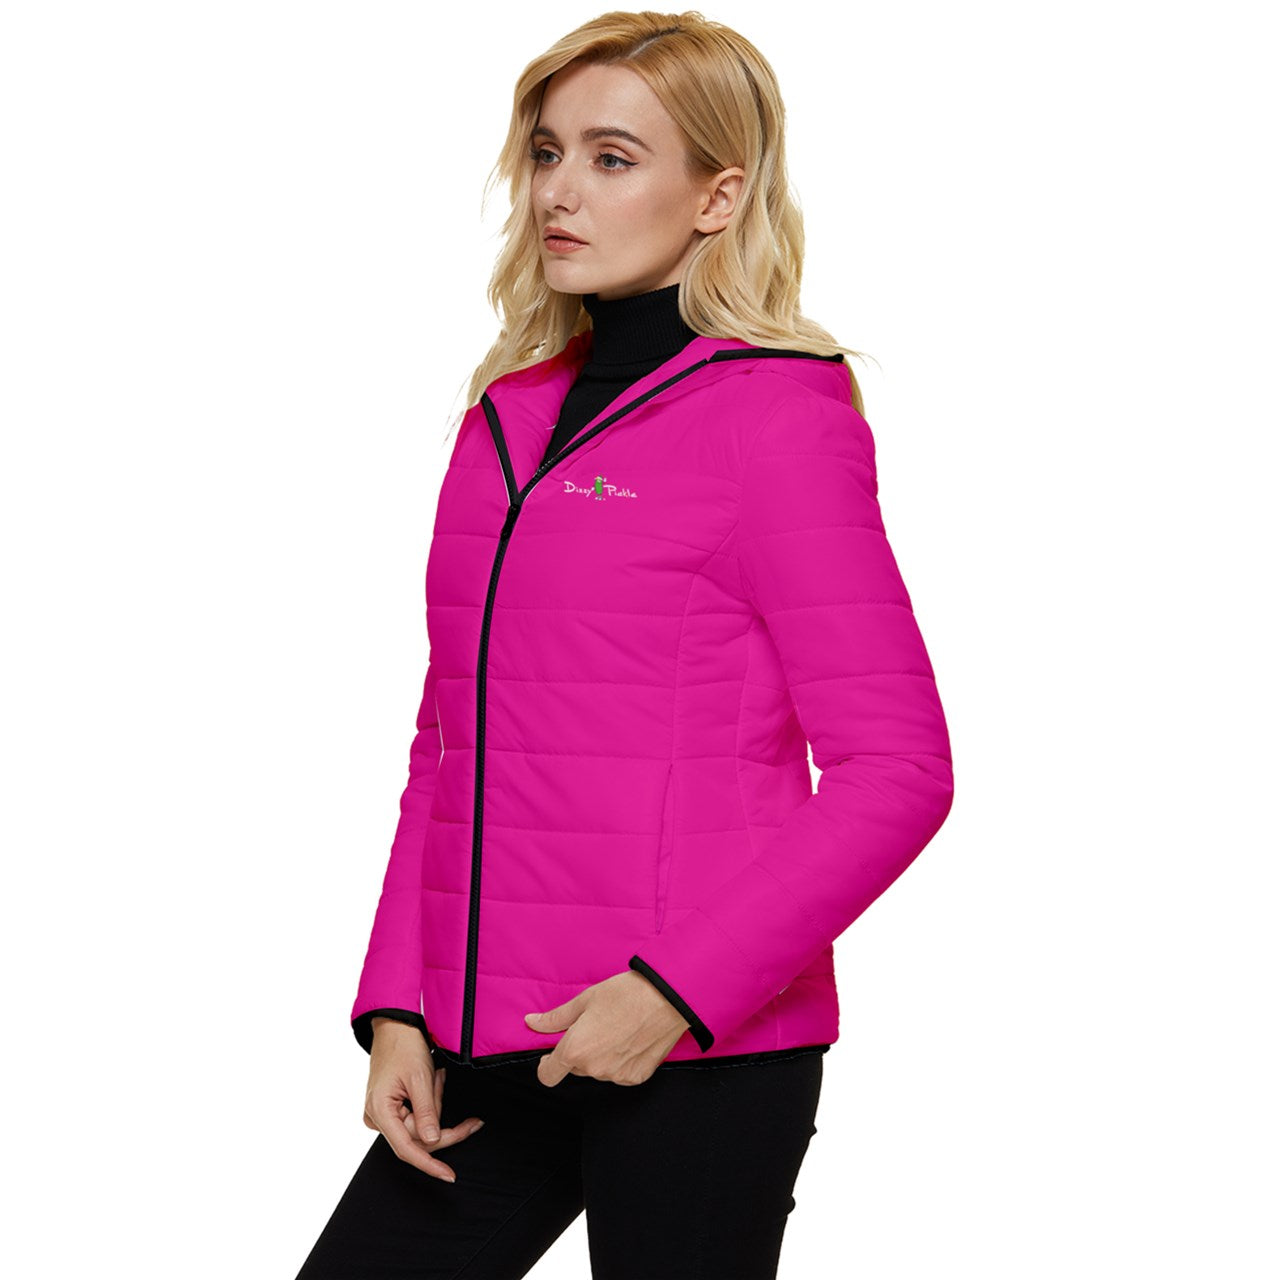 DZY P Classic - Hot Pink - Women's Hooded Quilted Jacket by Dizzy Pickle